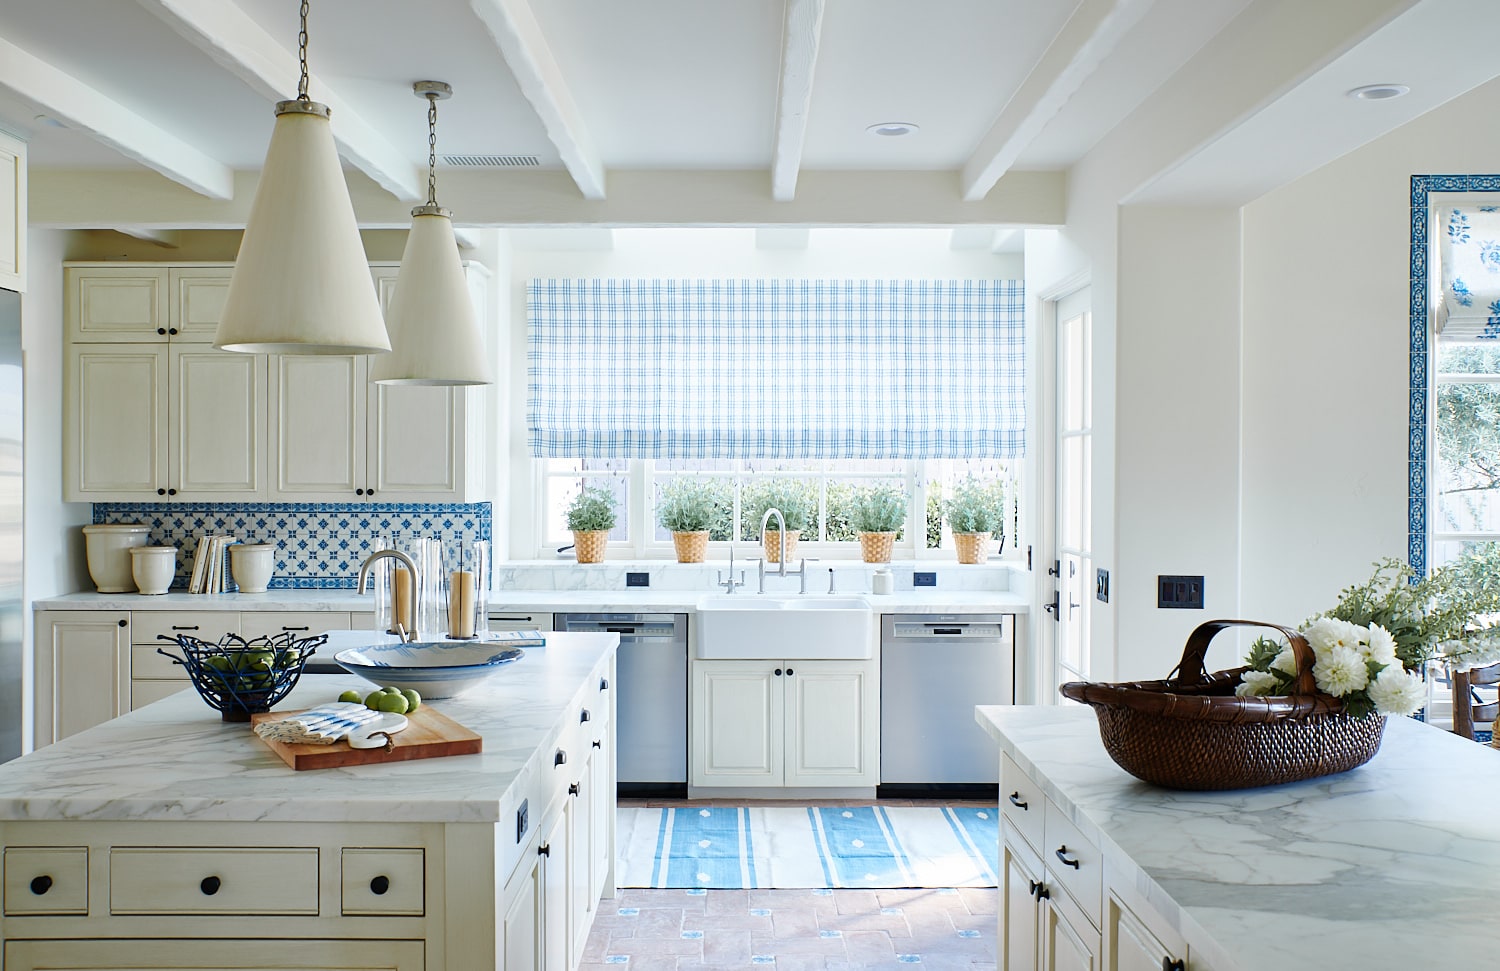 10 Favorites in Blue & White with the fabulous Mark D. Sikes - Amy Neunsinger Photography - kitchen - kitchen design - kitchen decor - white kitchen - wicker pendants